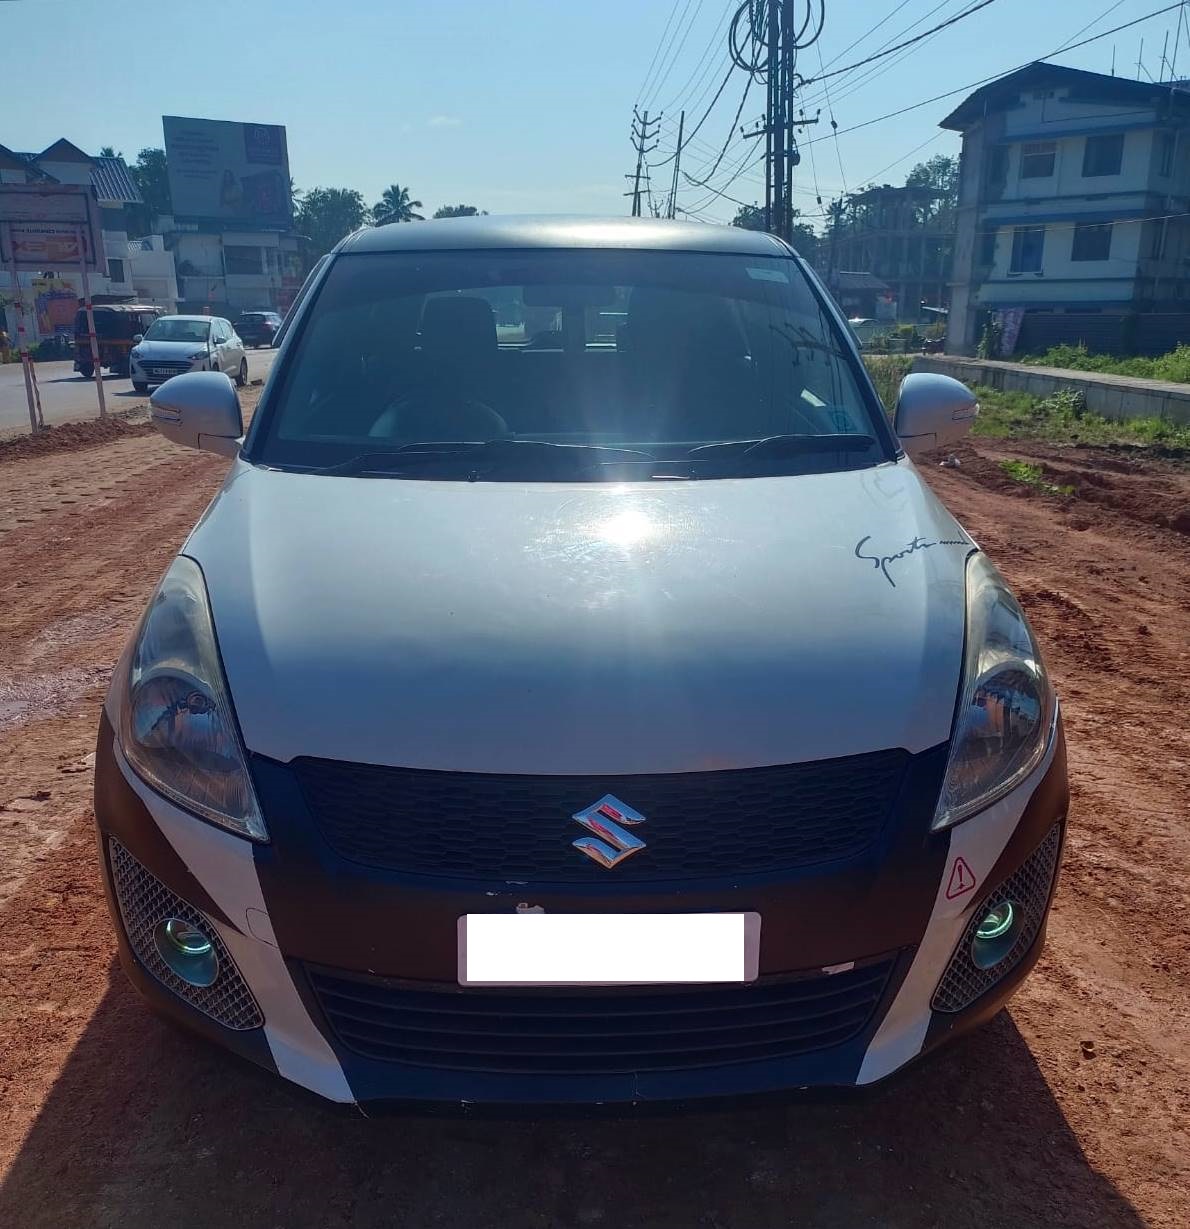 MARUTI SWIFT 2015 Second-hand Car for Sale in Alappuzha